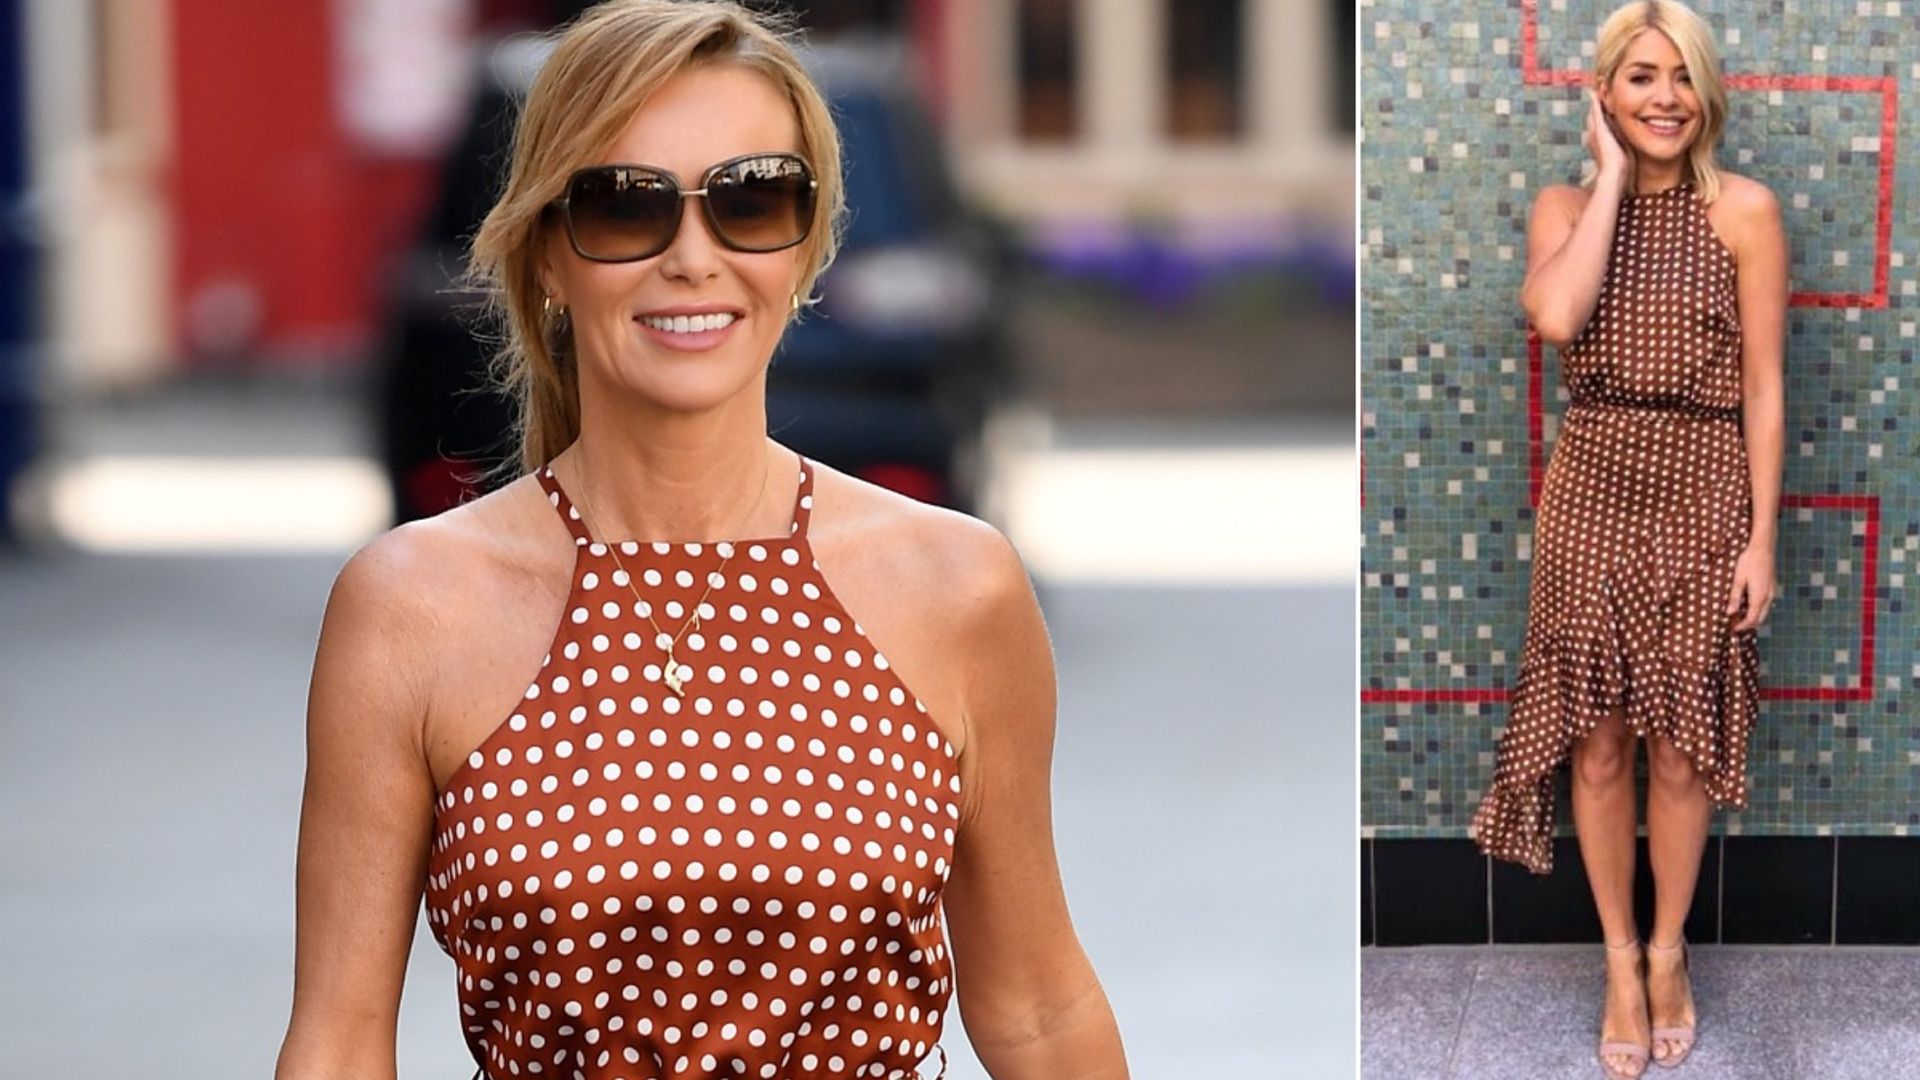 Amanda Holden puts on a chic display in green and white polka dot